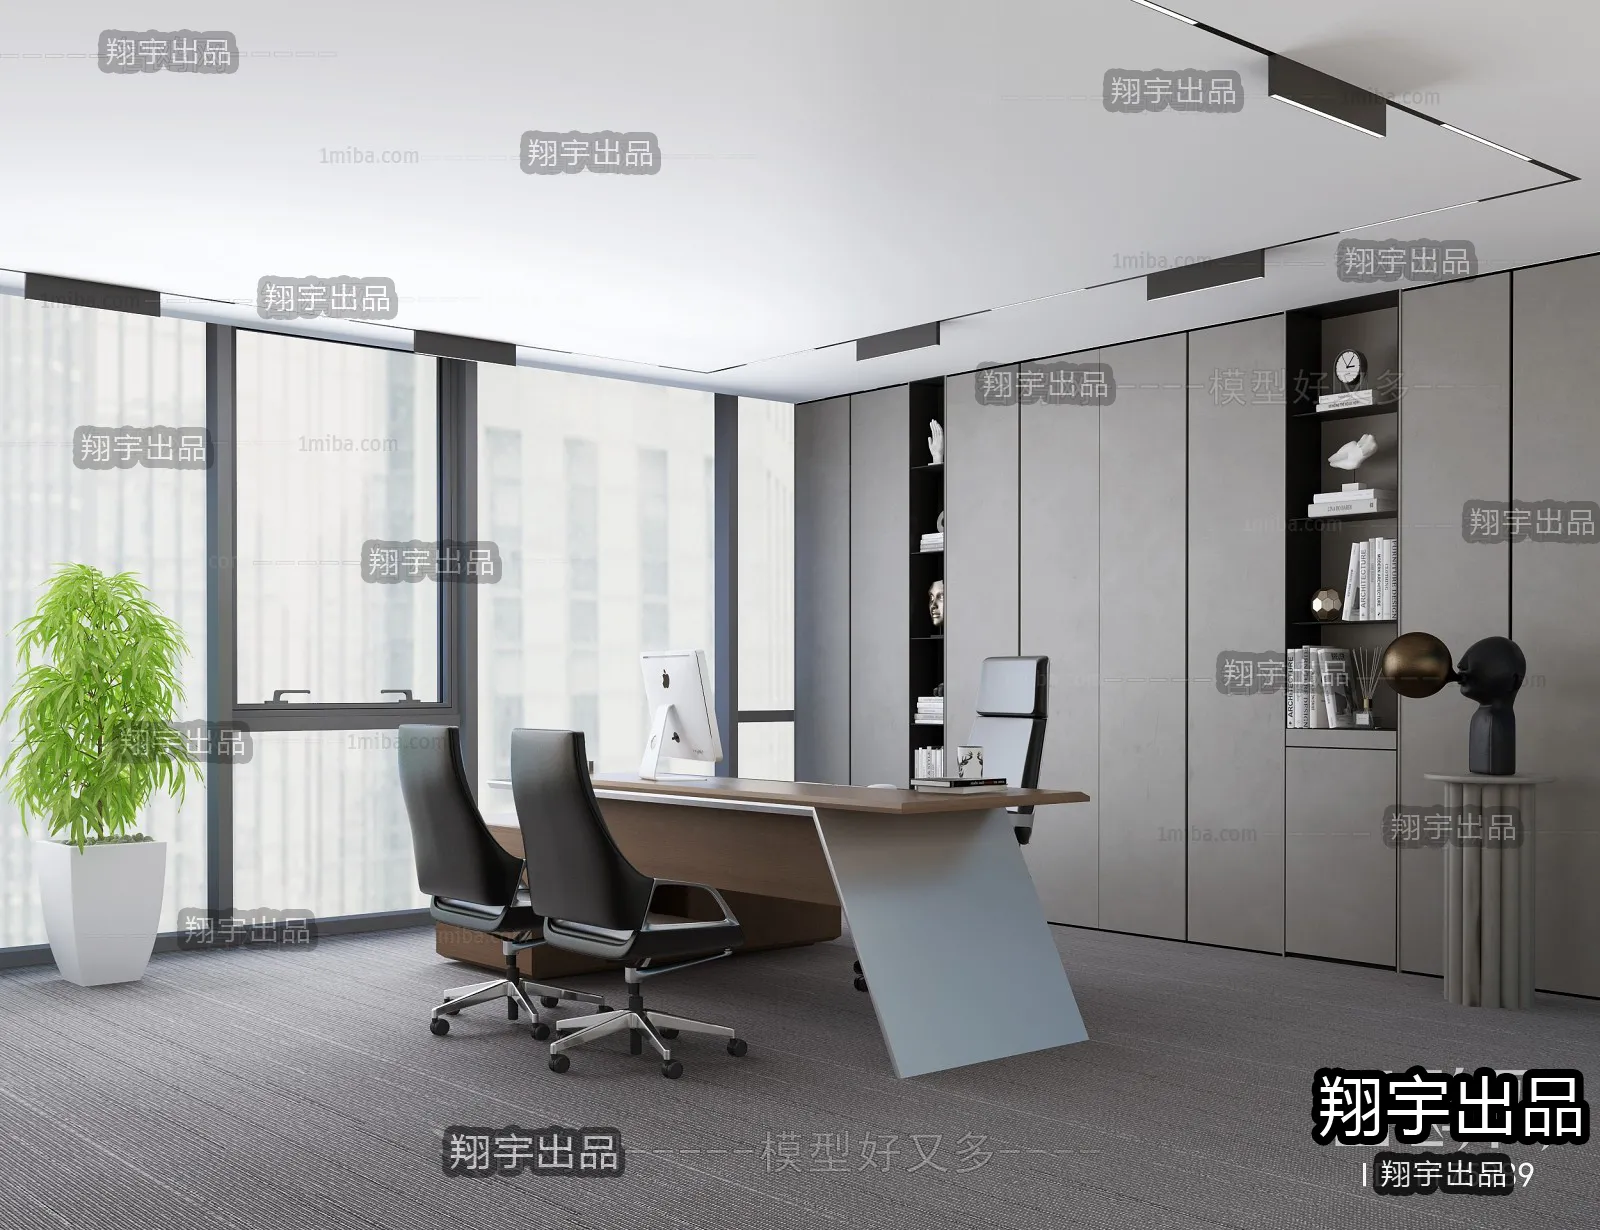 3D OFFICE INTERIOR (VRAY) – MANAGER ROOM 3D SCENES – 116